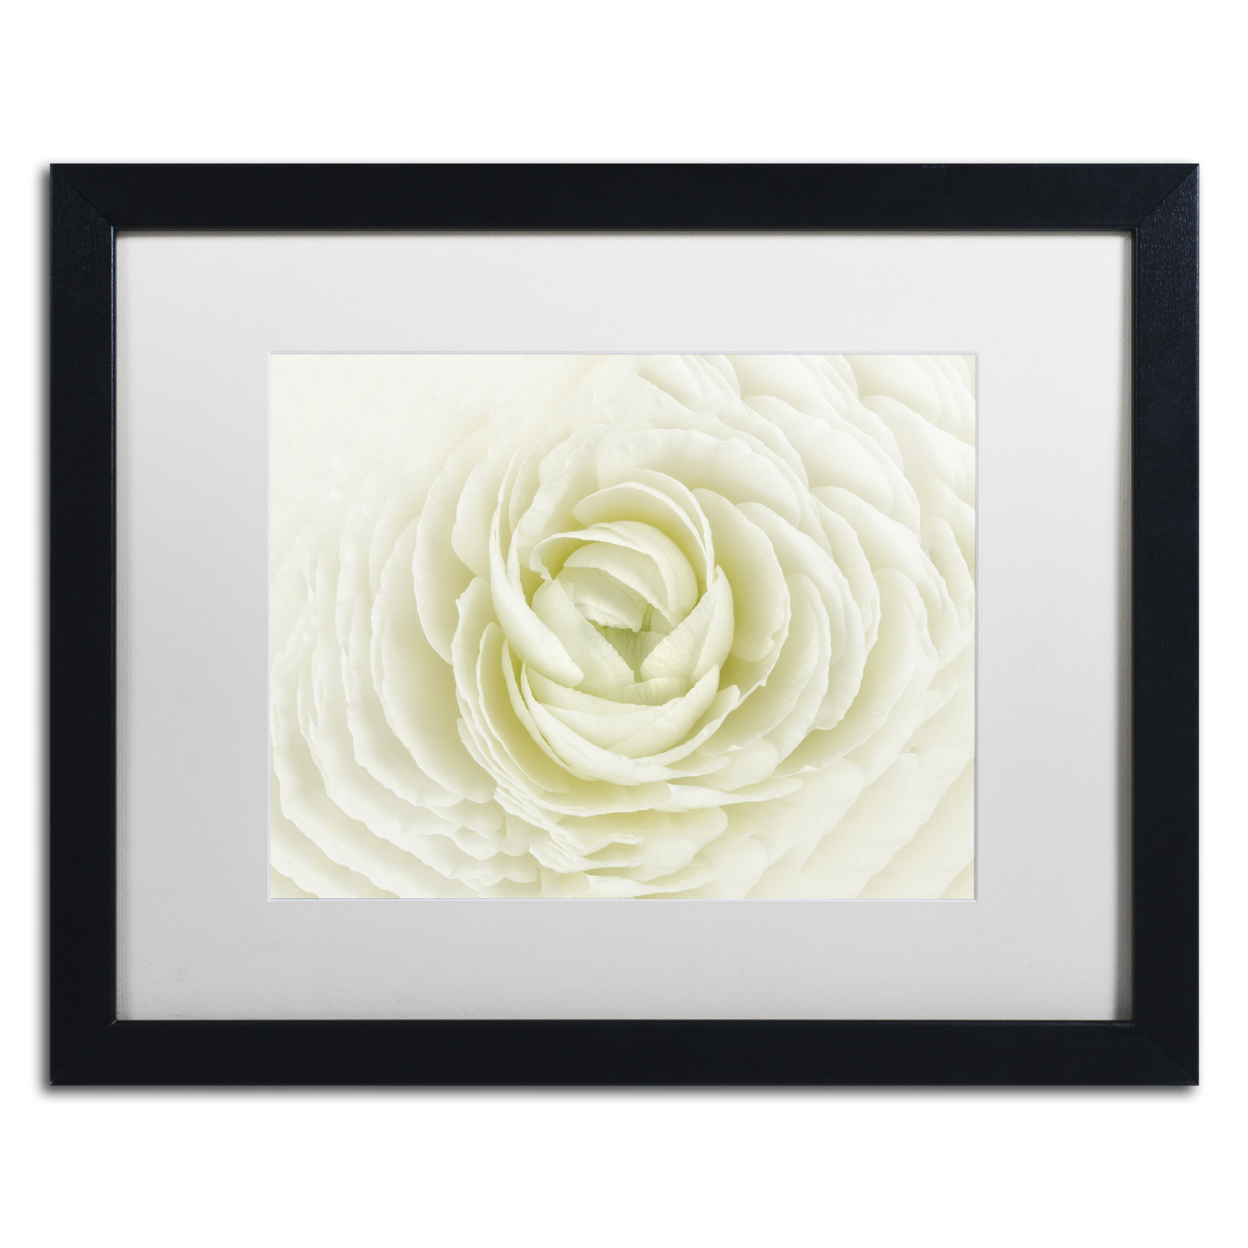 Cora Niele 'White Persian Buttercup' Black Wooden Framed Art 18 X 22 Inches